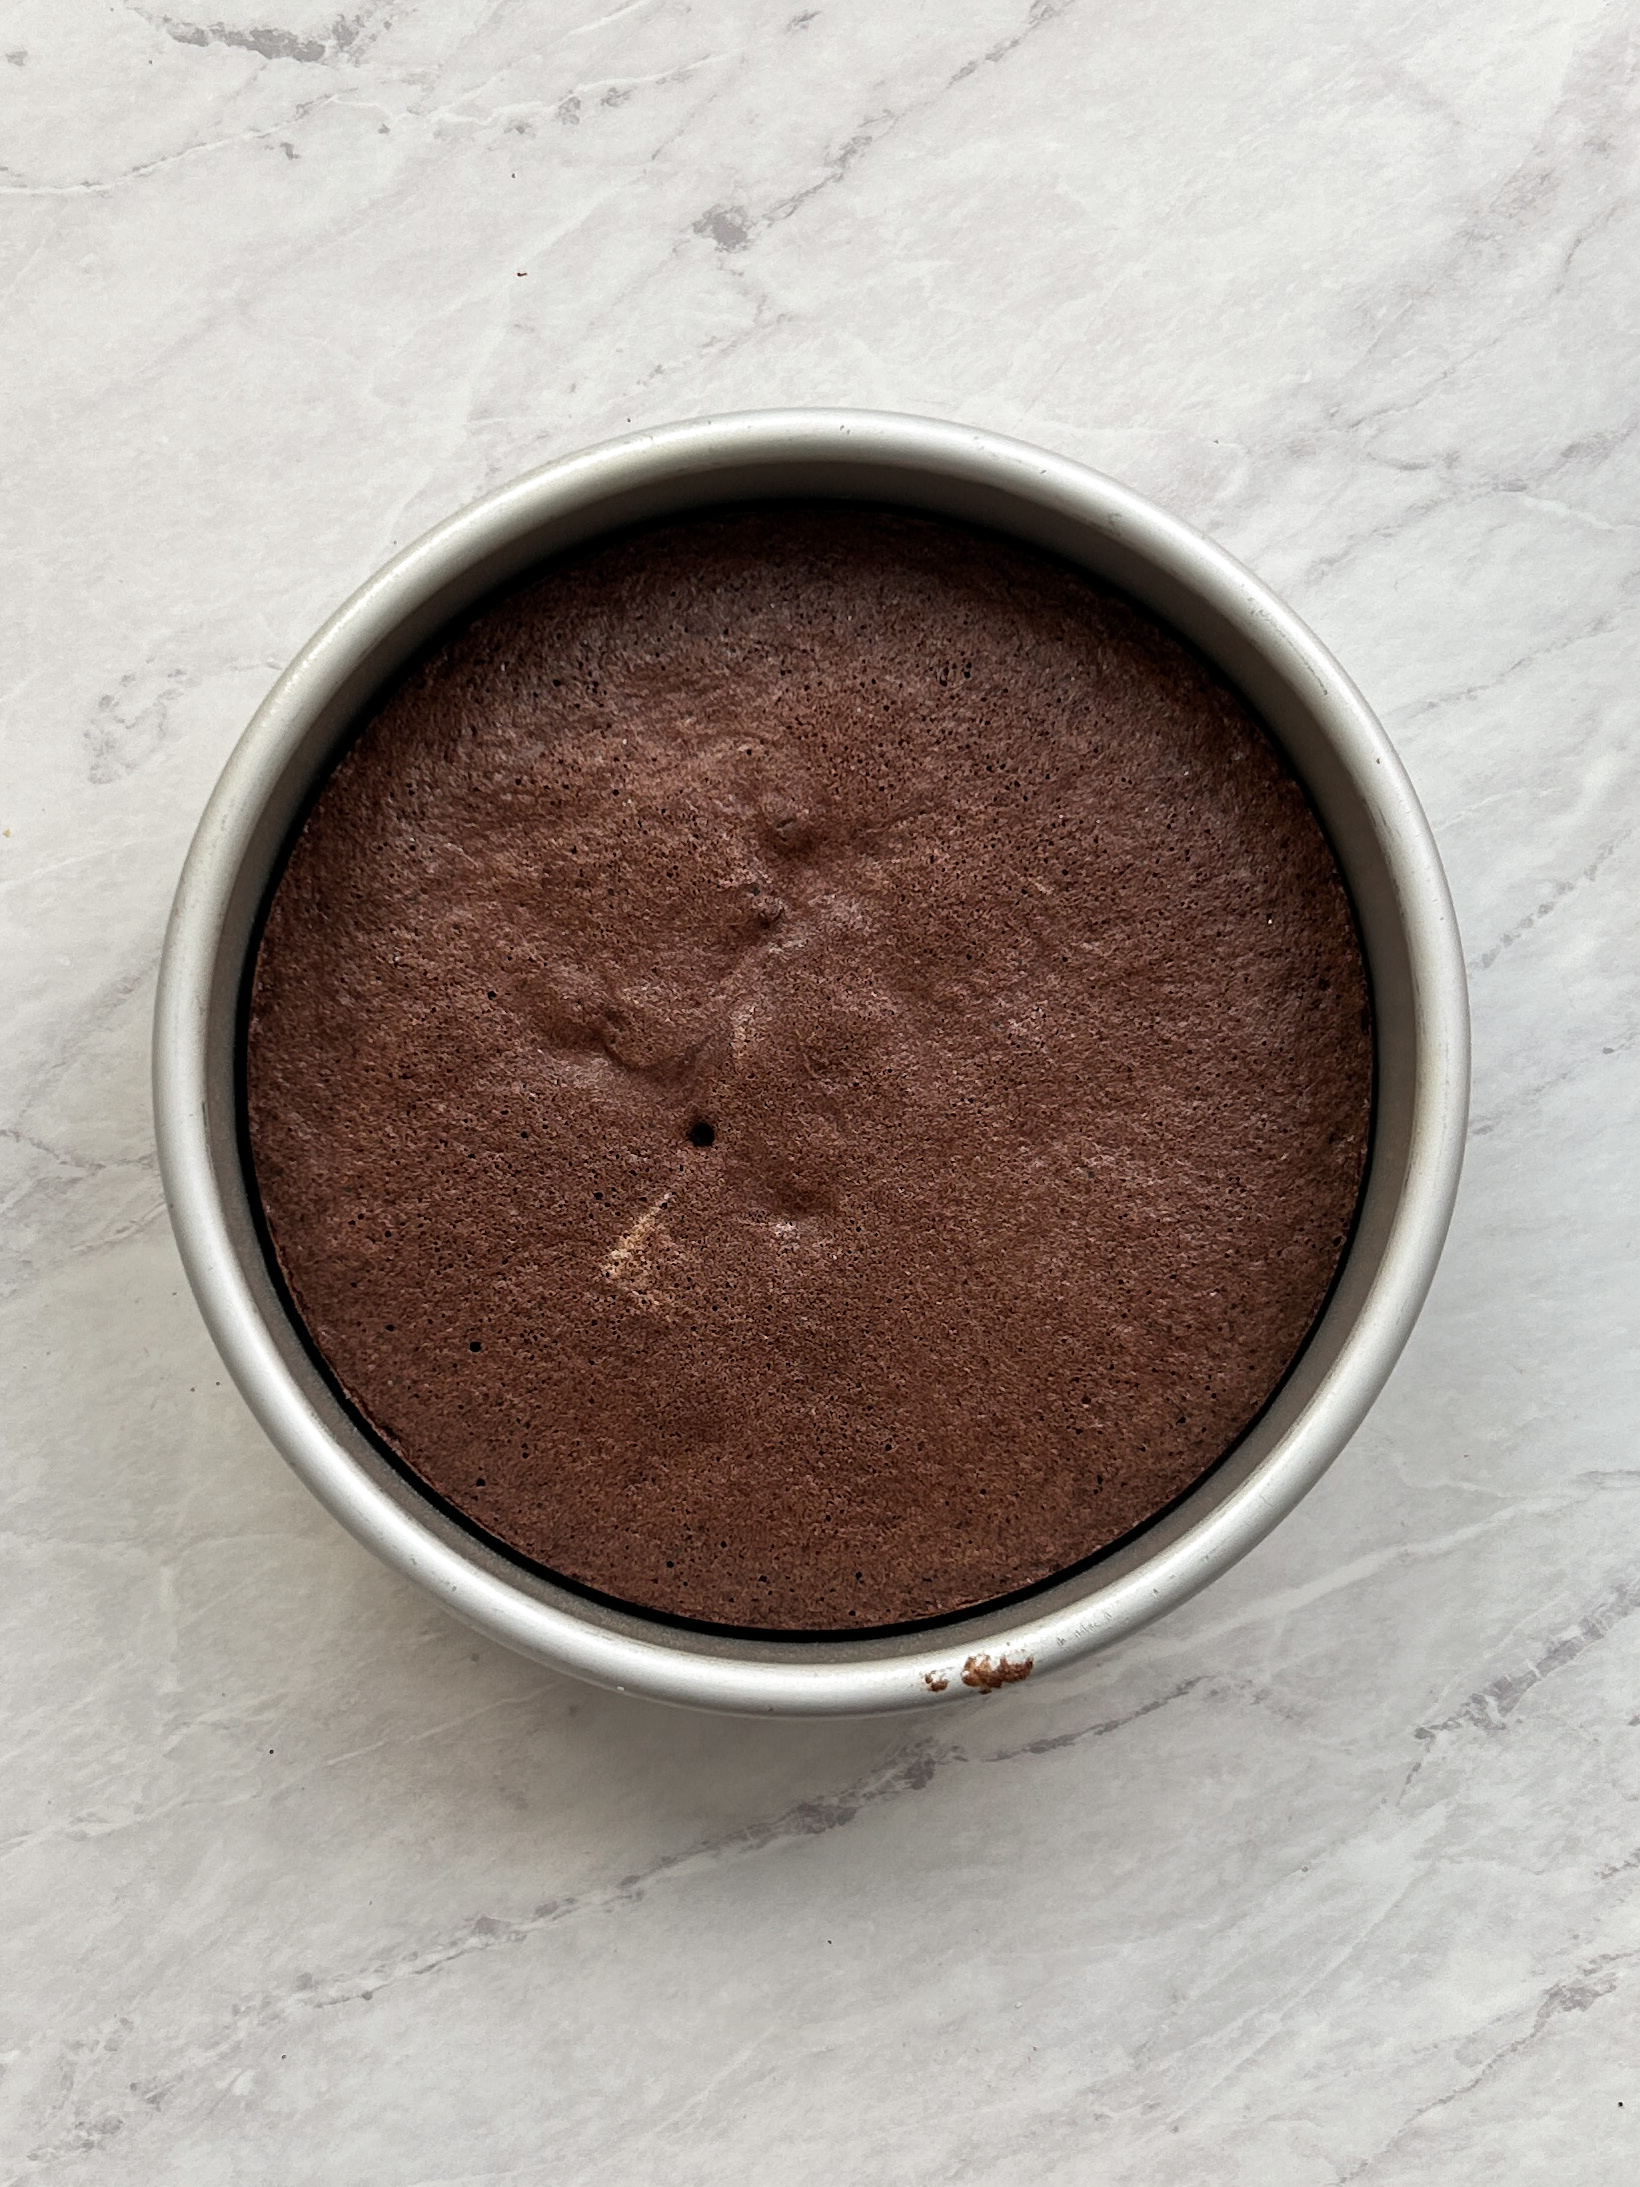 baked chocolate cake in a cake pan